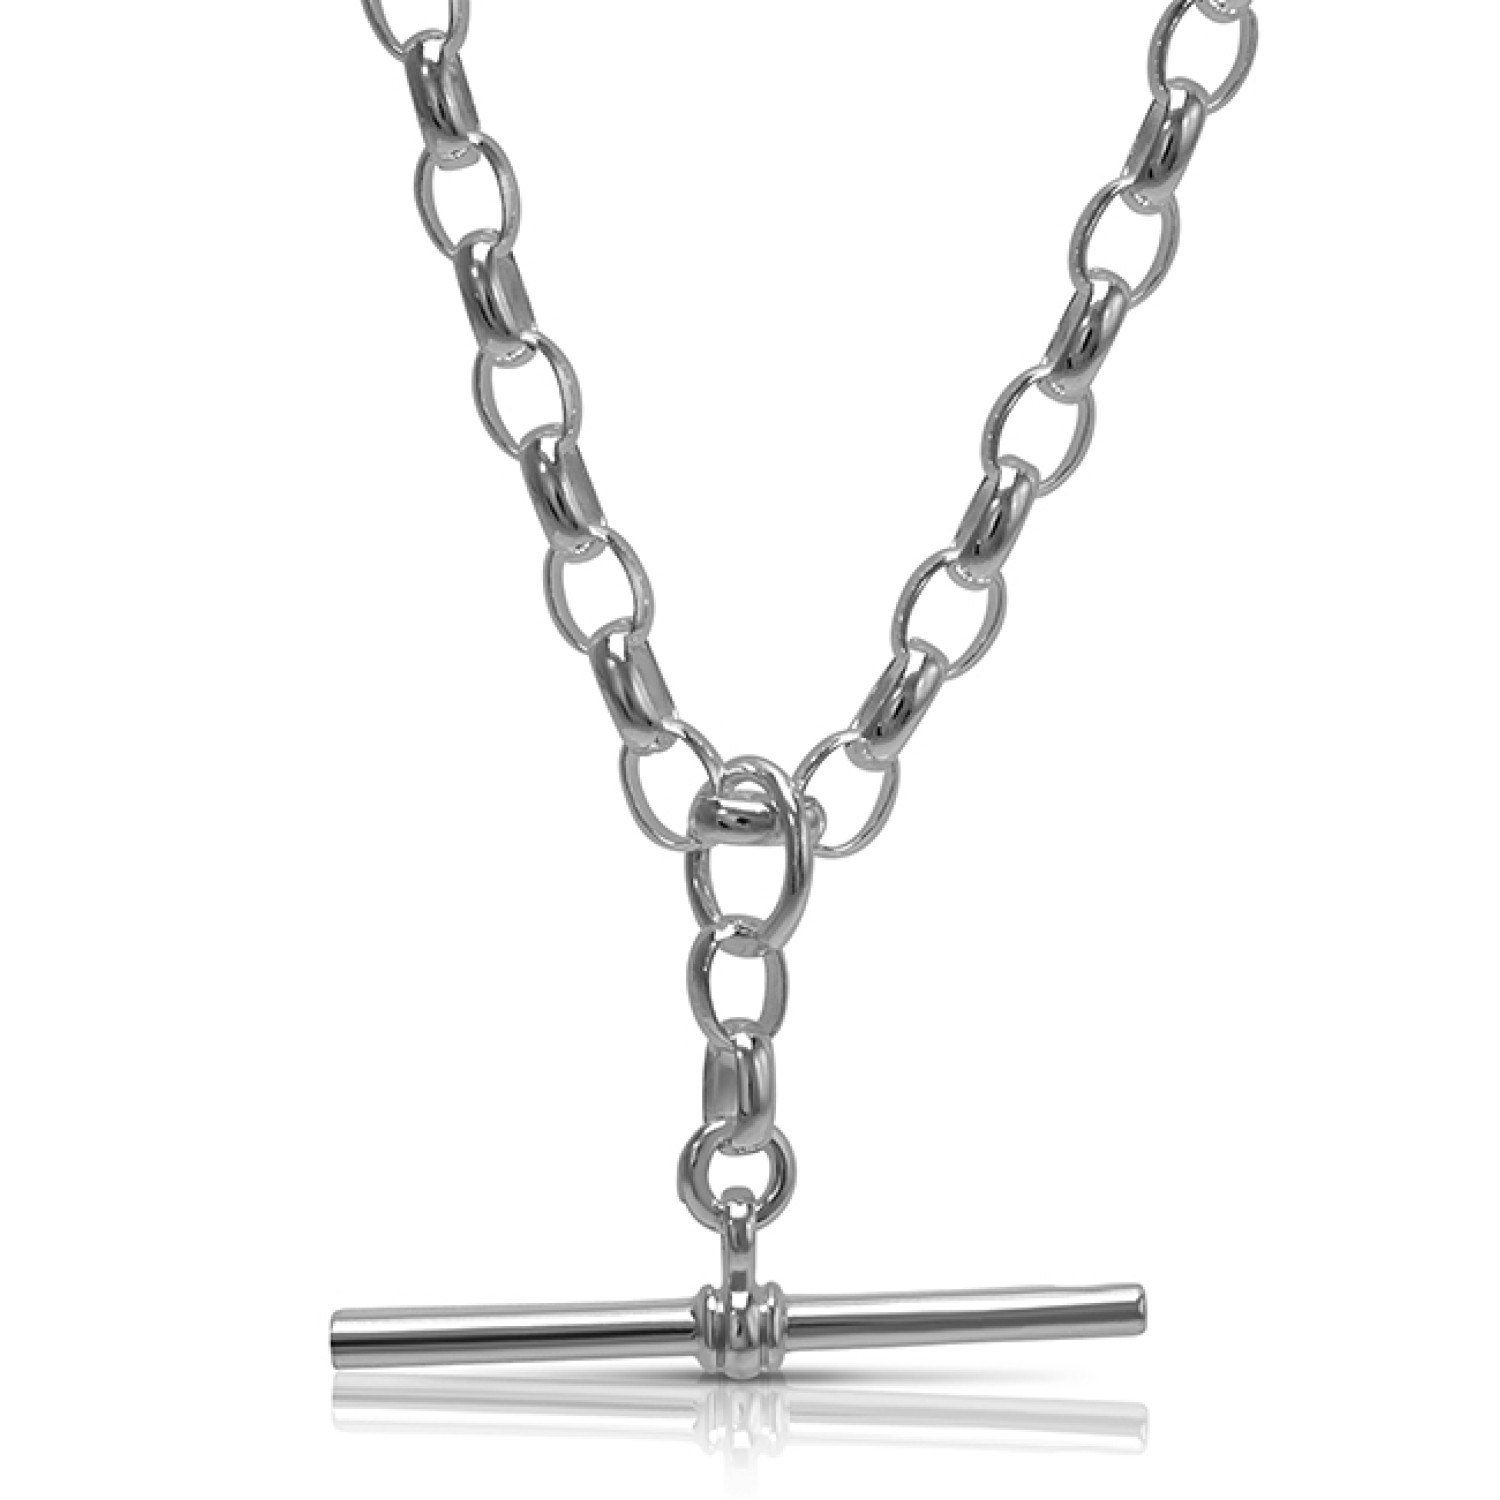 Sterling Silver Fob Pendant 50cm. A 50cm Belcher style chain with a free running Fob Pendant attached  Available at Christies Jewellery in-store or online Crafted in 925 Sterling Silver Belcher style silver chain with fob 50cm in length Gift wra @christie